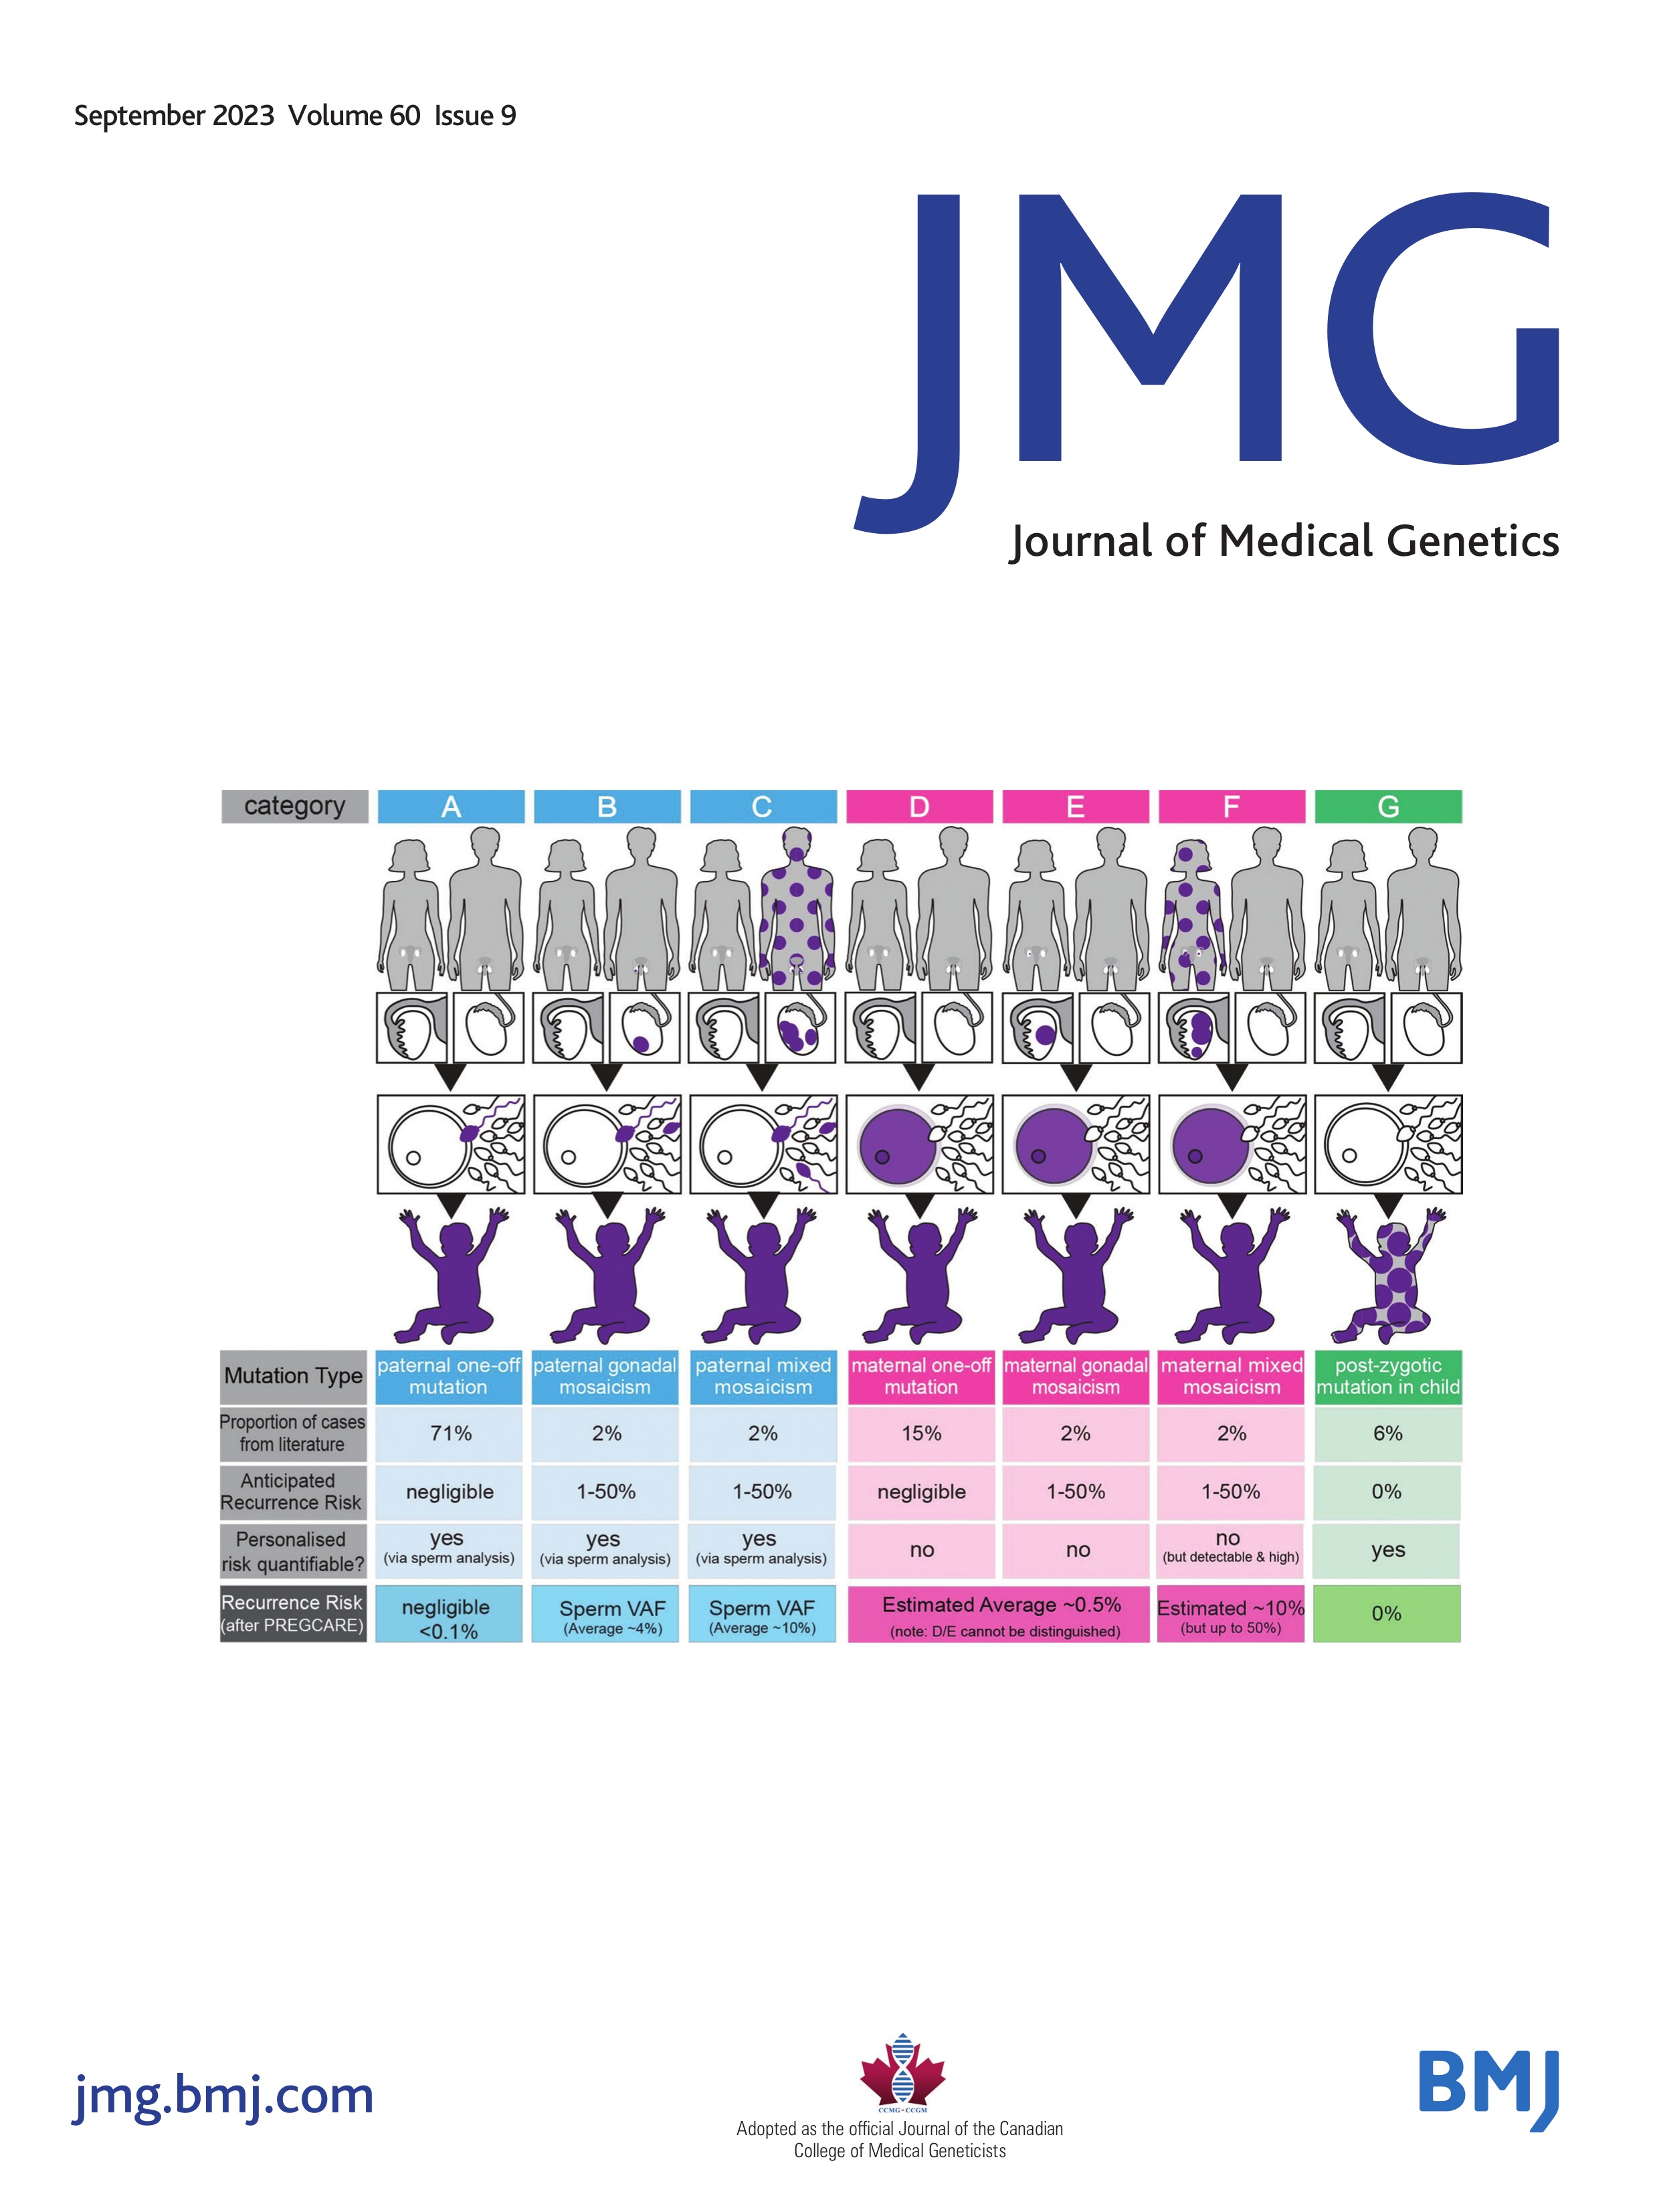 Providing recurrence risk counselling for parents after diagnosis of a serious genetic condition caused by an apparently de novo mutation in their child: a qualitative investigation of the PREGCARE strategy with UK clinical genetics practitioners